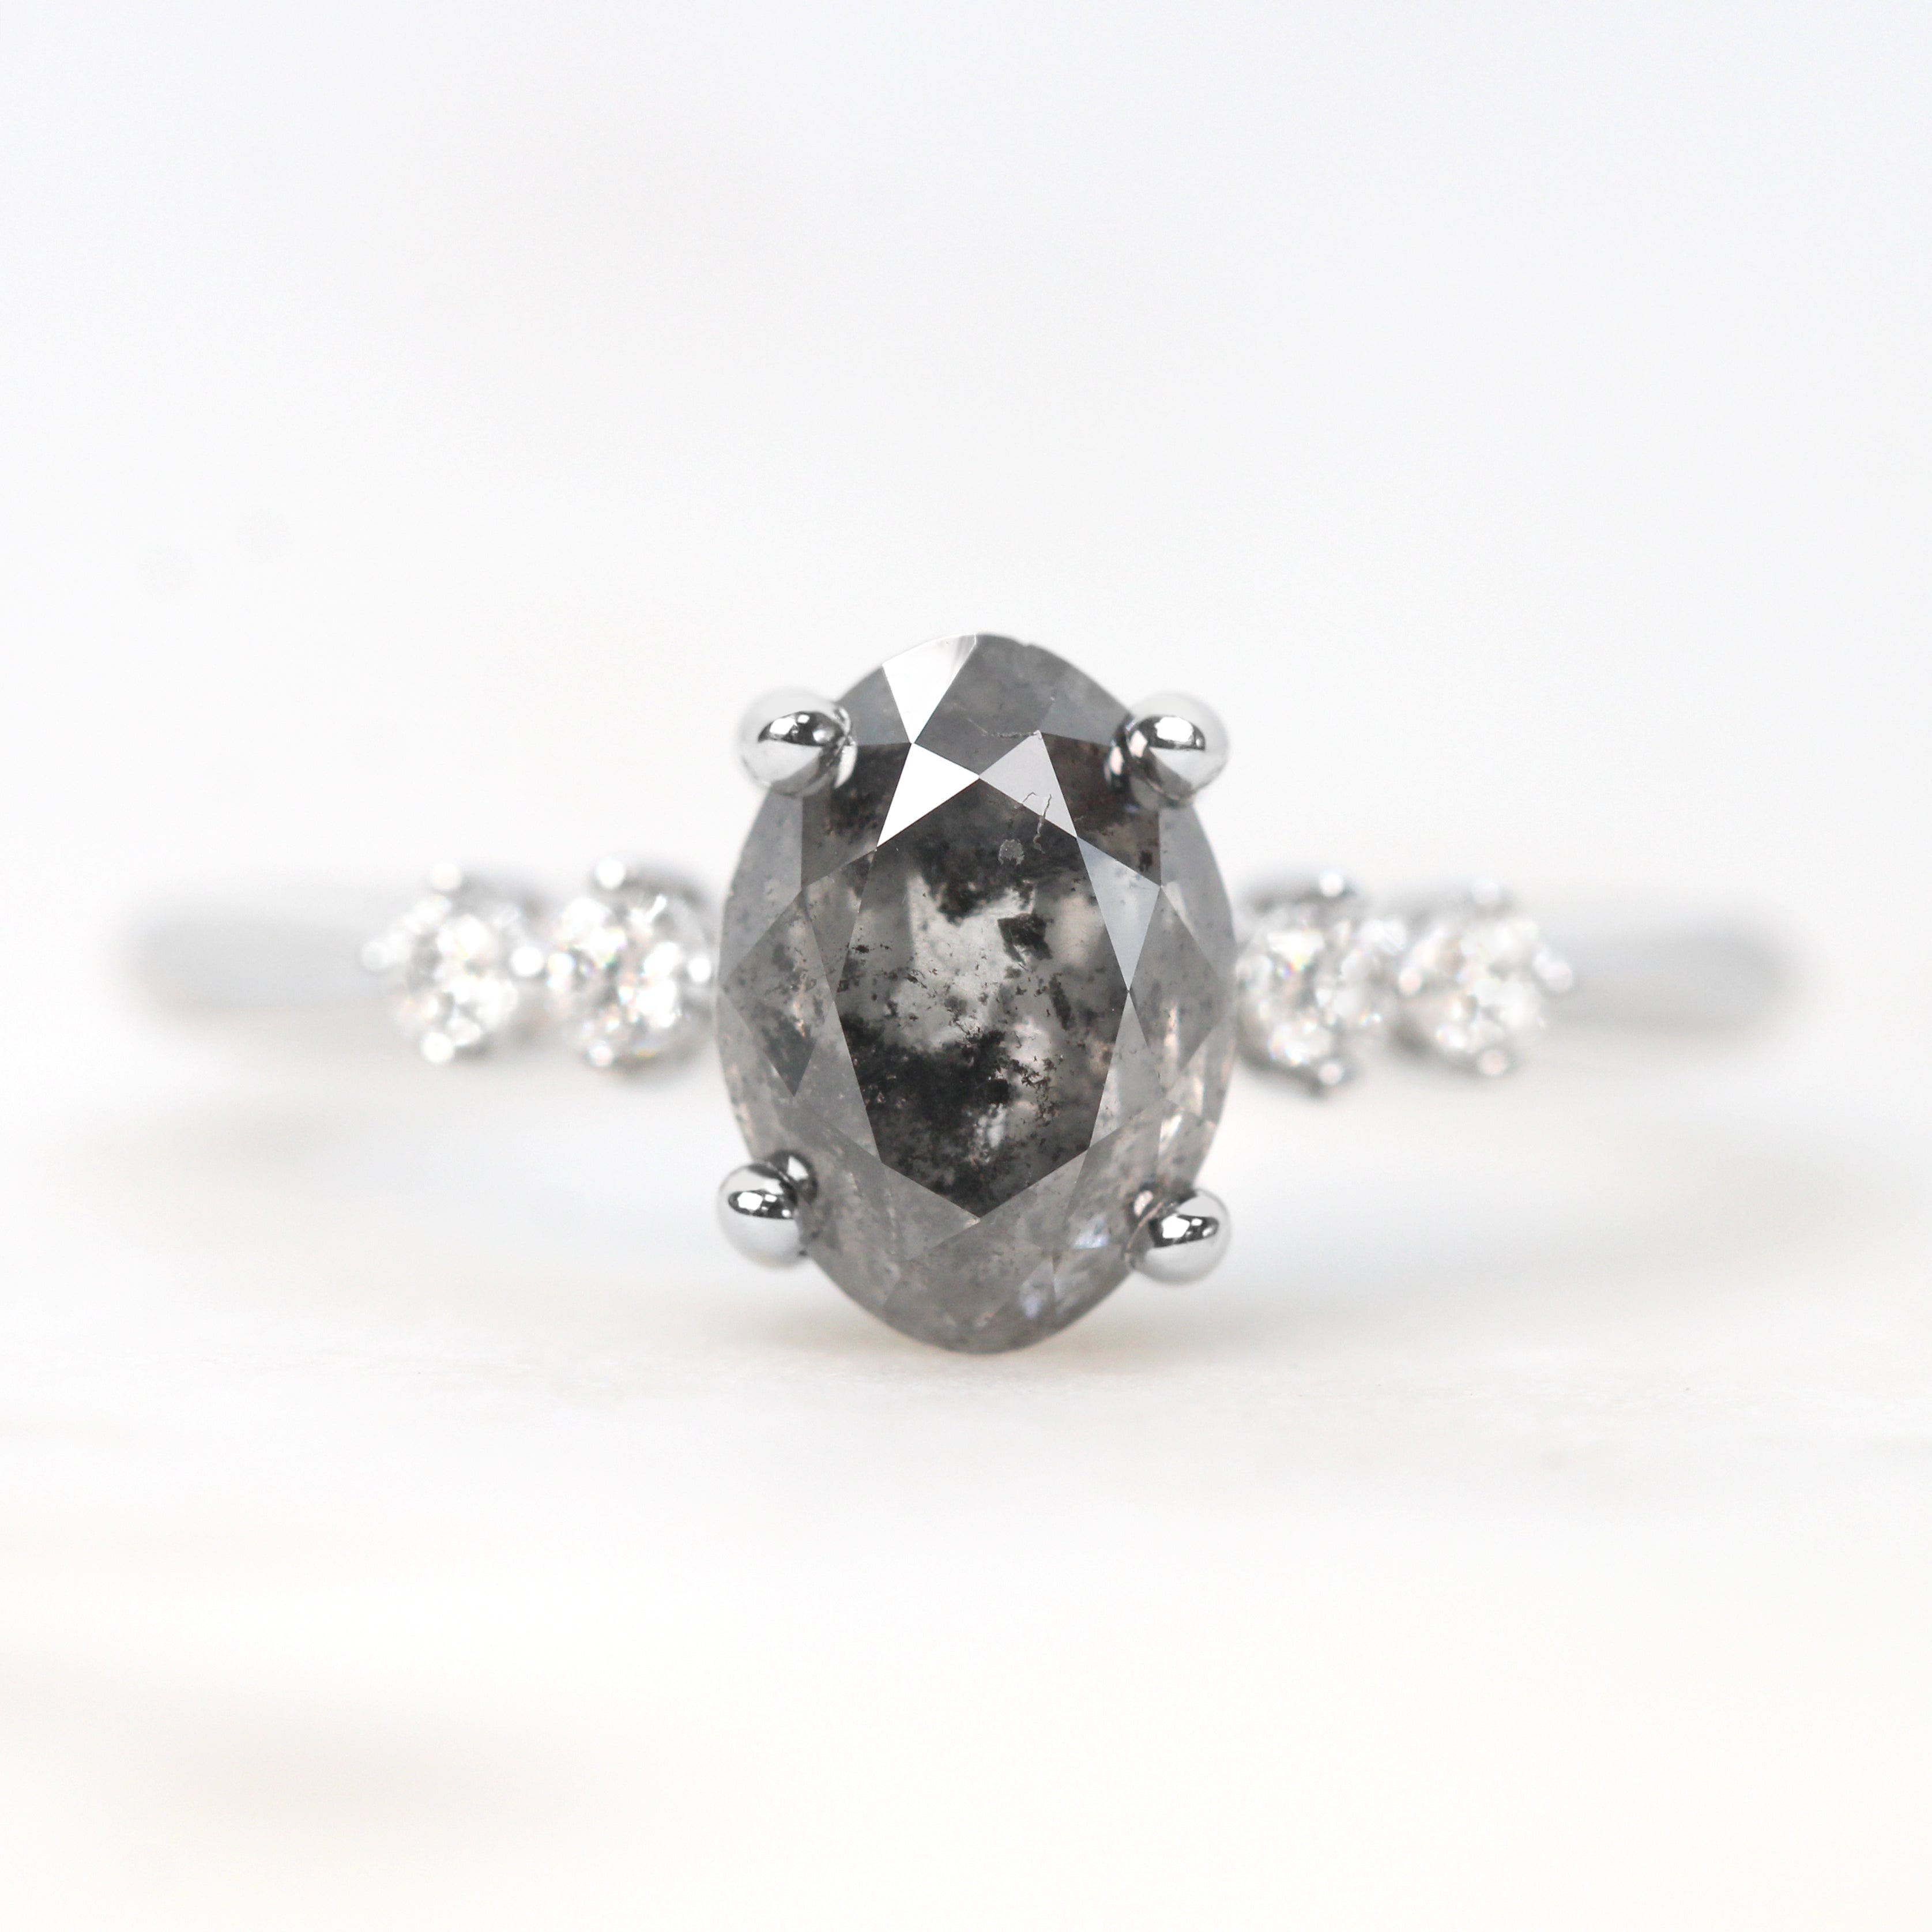 Cordelia Ring with a 1.86 Carat Dark Gray Oval Celestial Diamond and White Accent Diamonds in 14k White Gold - Ready to Size and Ship - Midwinter Co. Alternative Bridal Rings and Modern Fine Jewelry